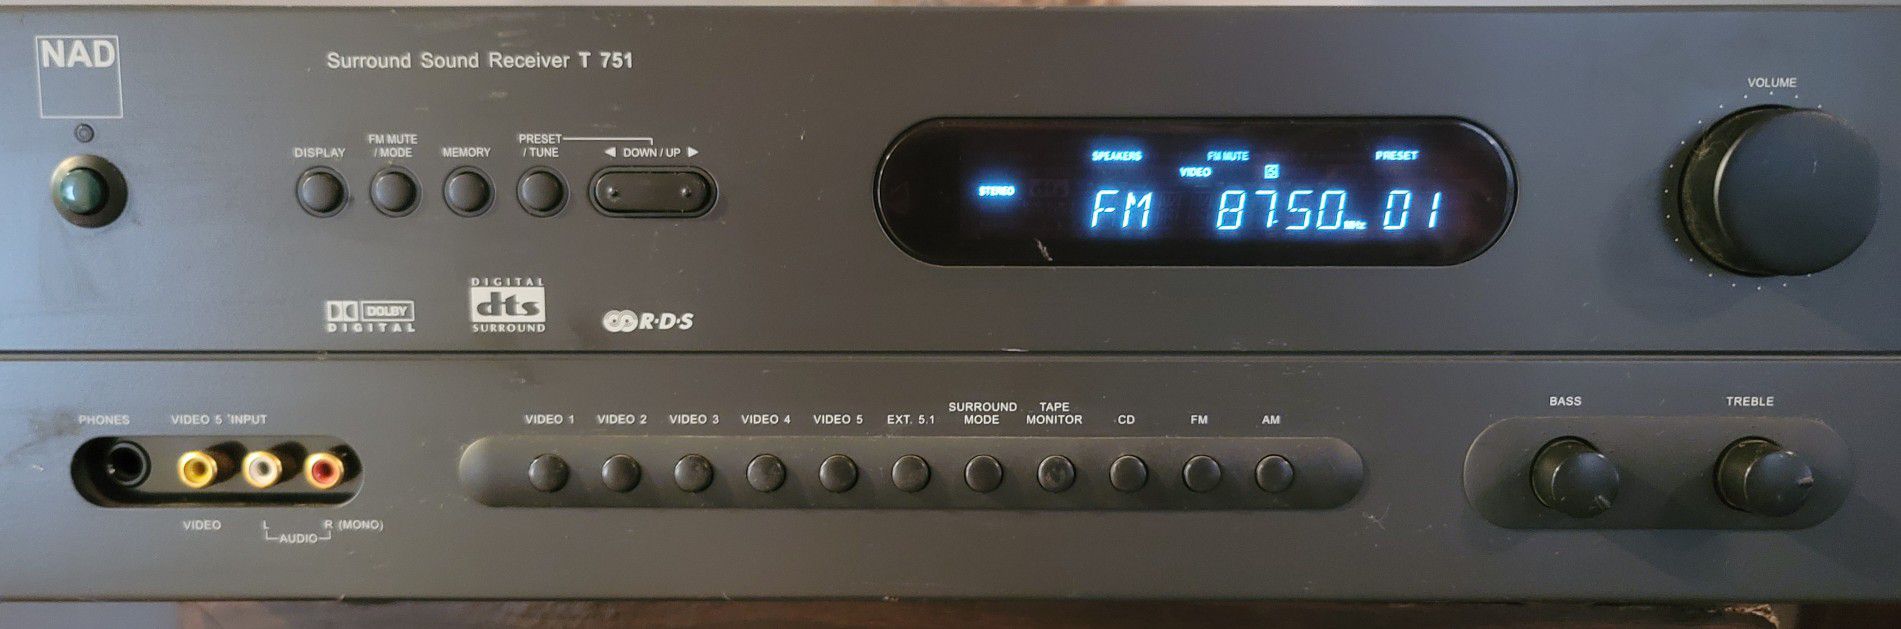 NAD T751 STEREO RECEIVER 